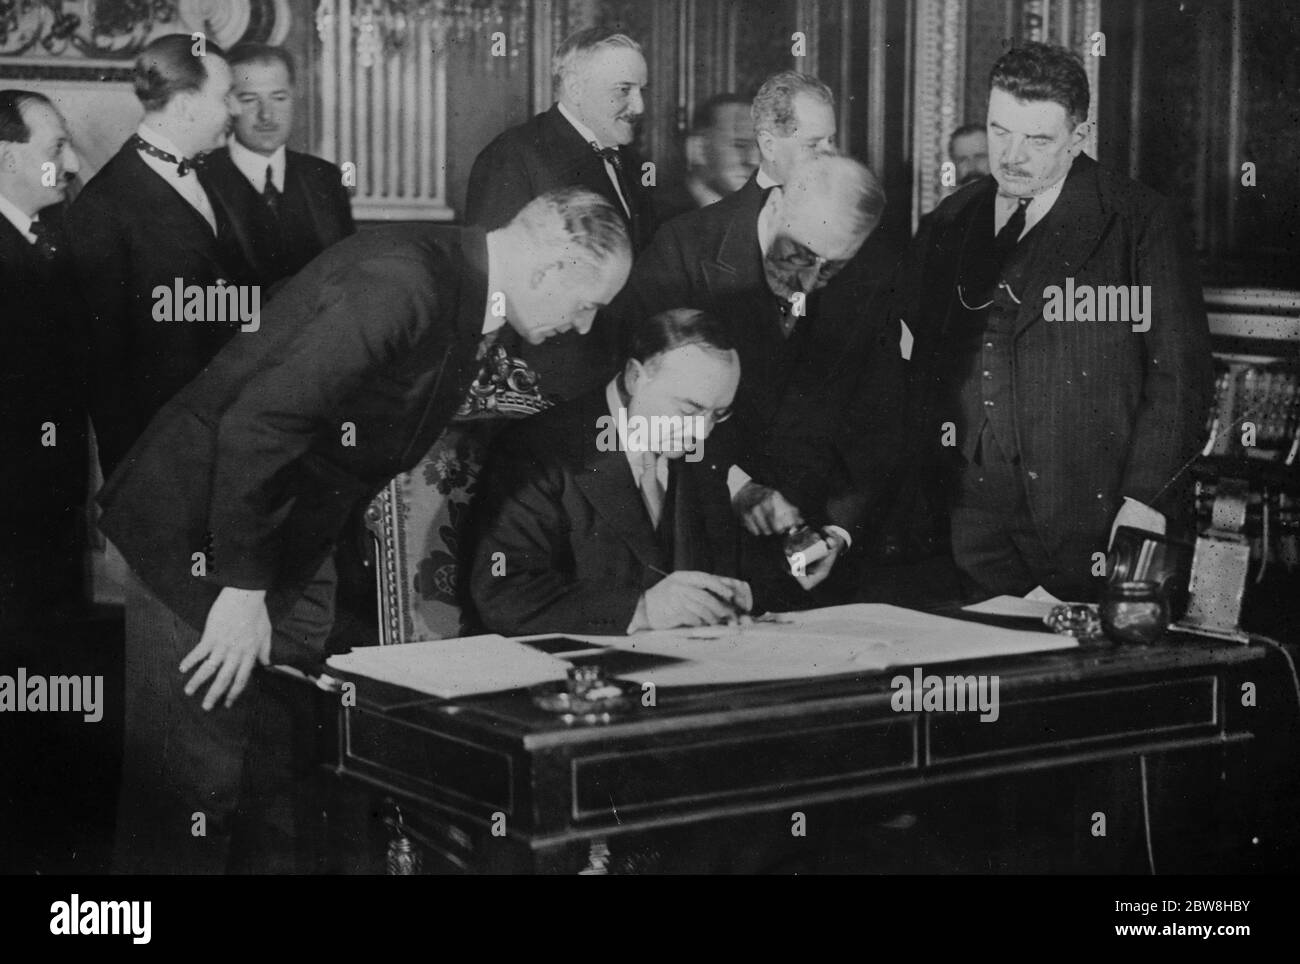 Franco Soviet non aggression pact signed . M Dovagalevsky the Soviet Ambassador to France and Mr Herriot , the French Premier ( on right ) at the signing of the Franco Soviet non aggression pact in Paris . 1 December 1932 Stock Photo